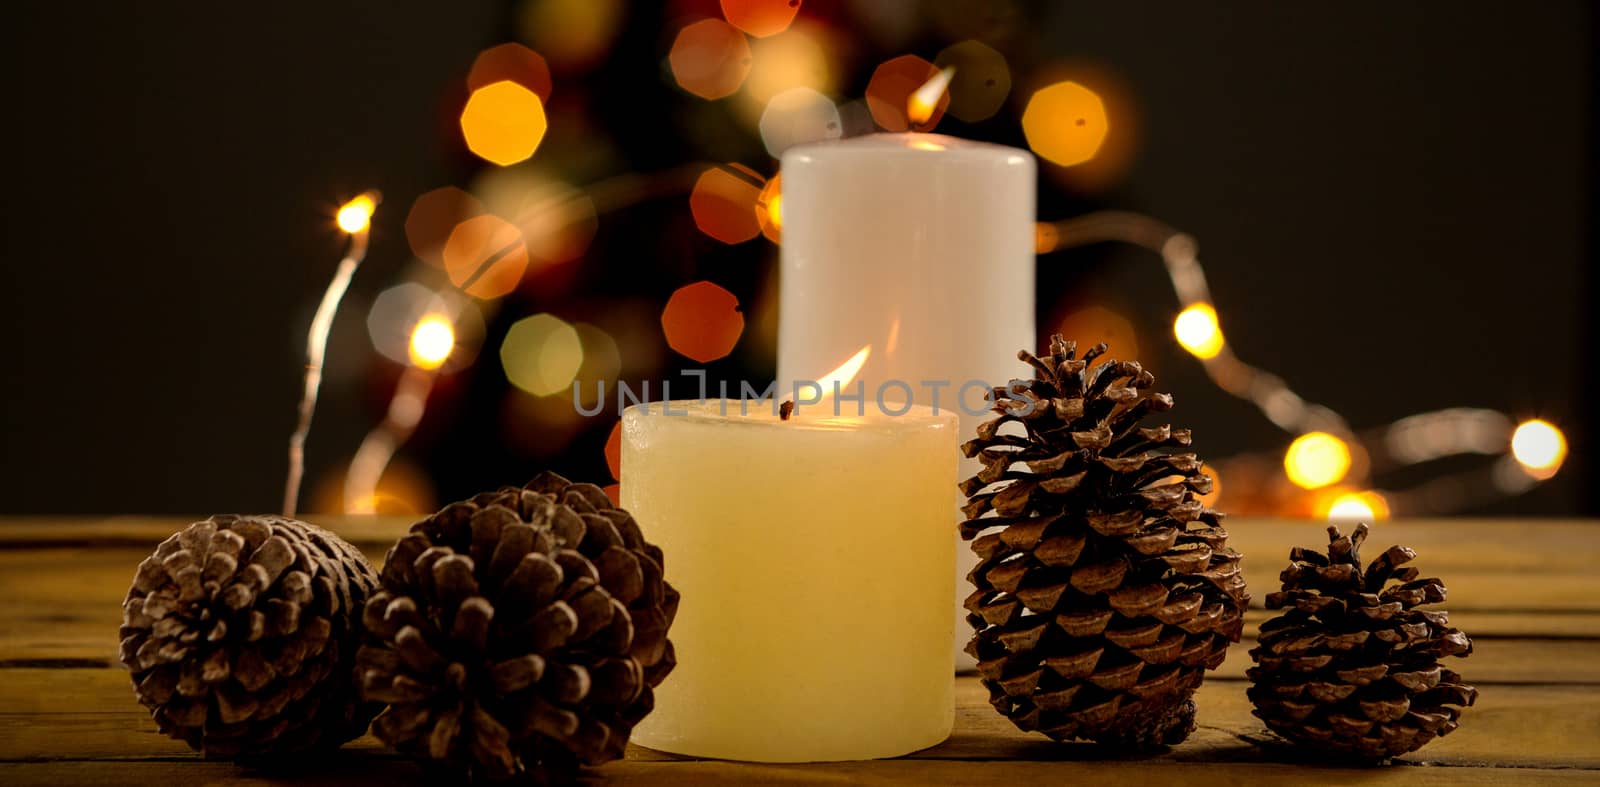 Composite image of close up of pine cones with illuminated candles on table by Wavebreakmedia